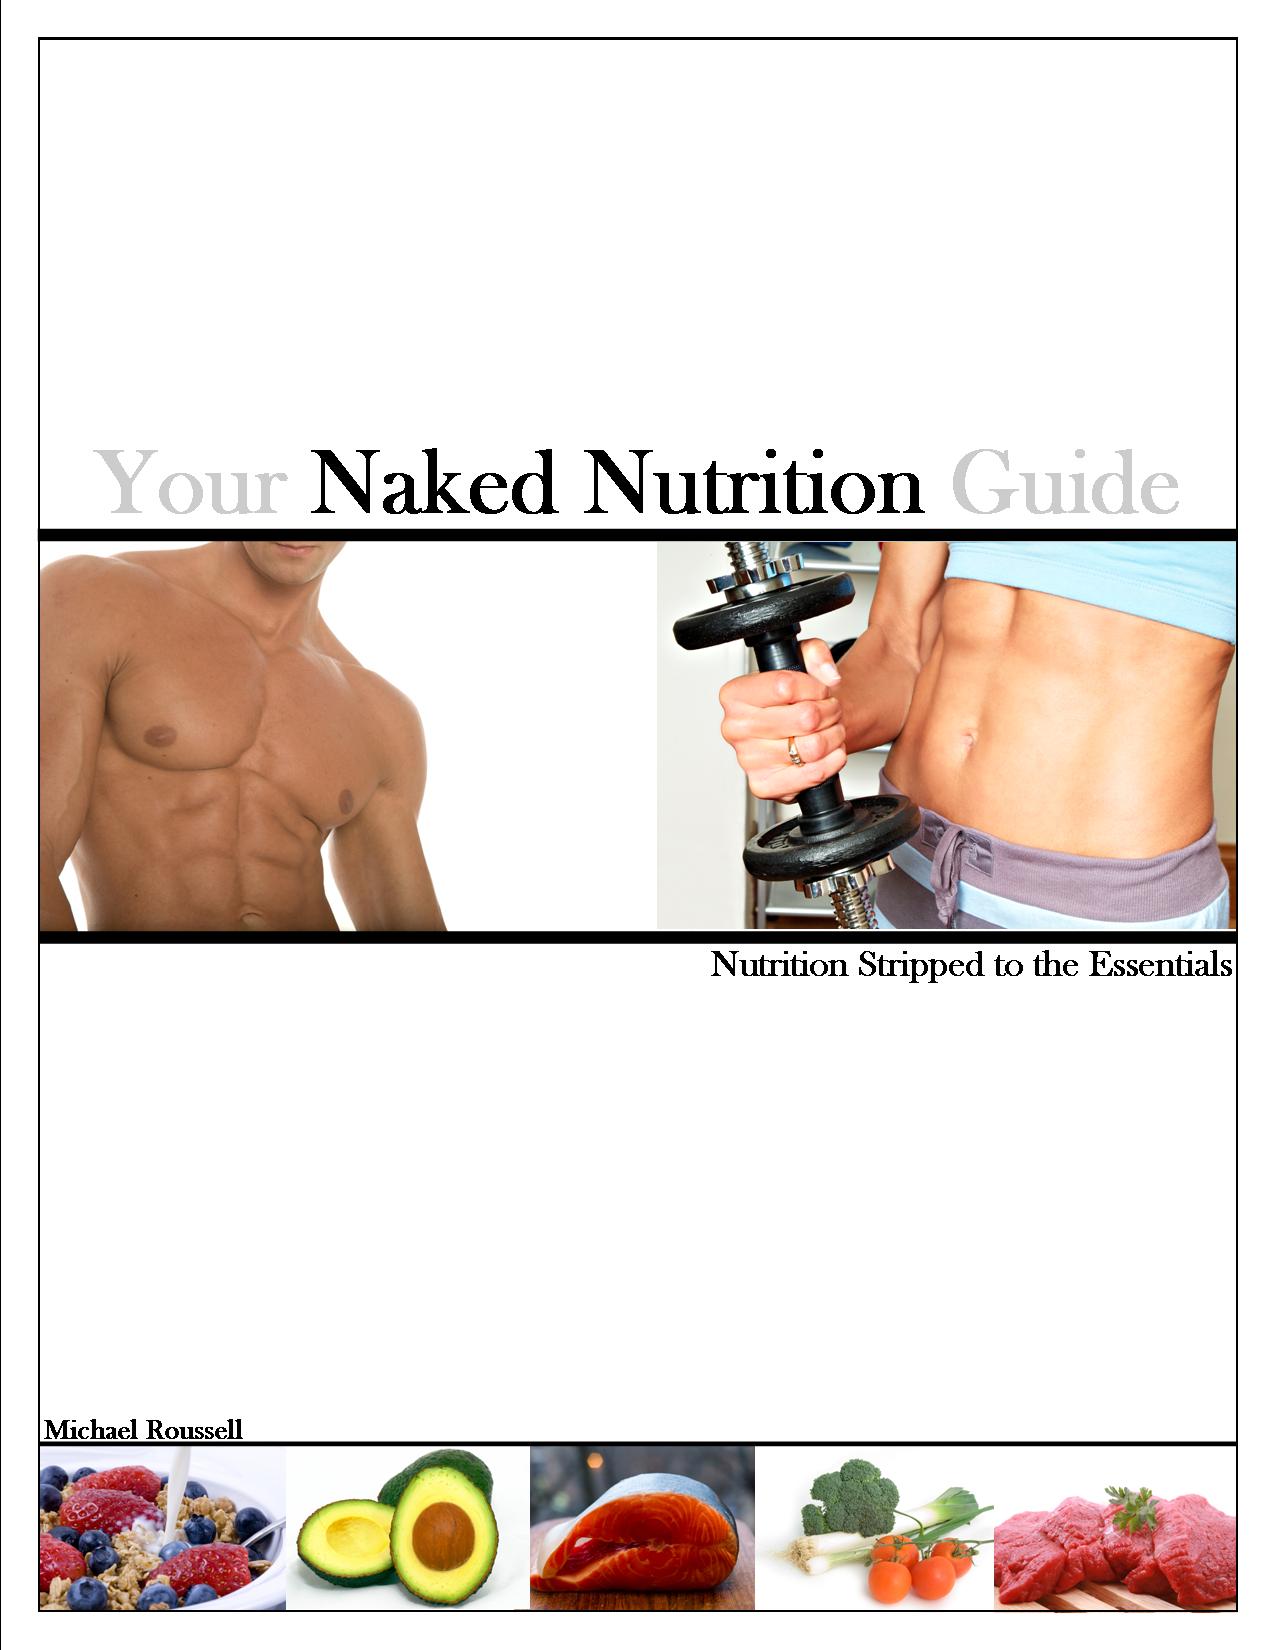 Naked Nutrition Guide 35